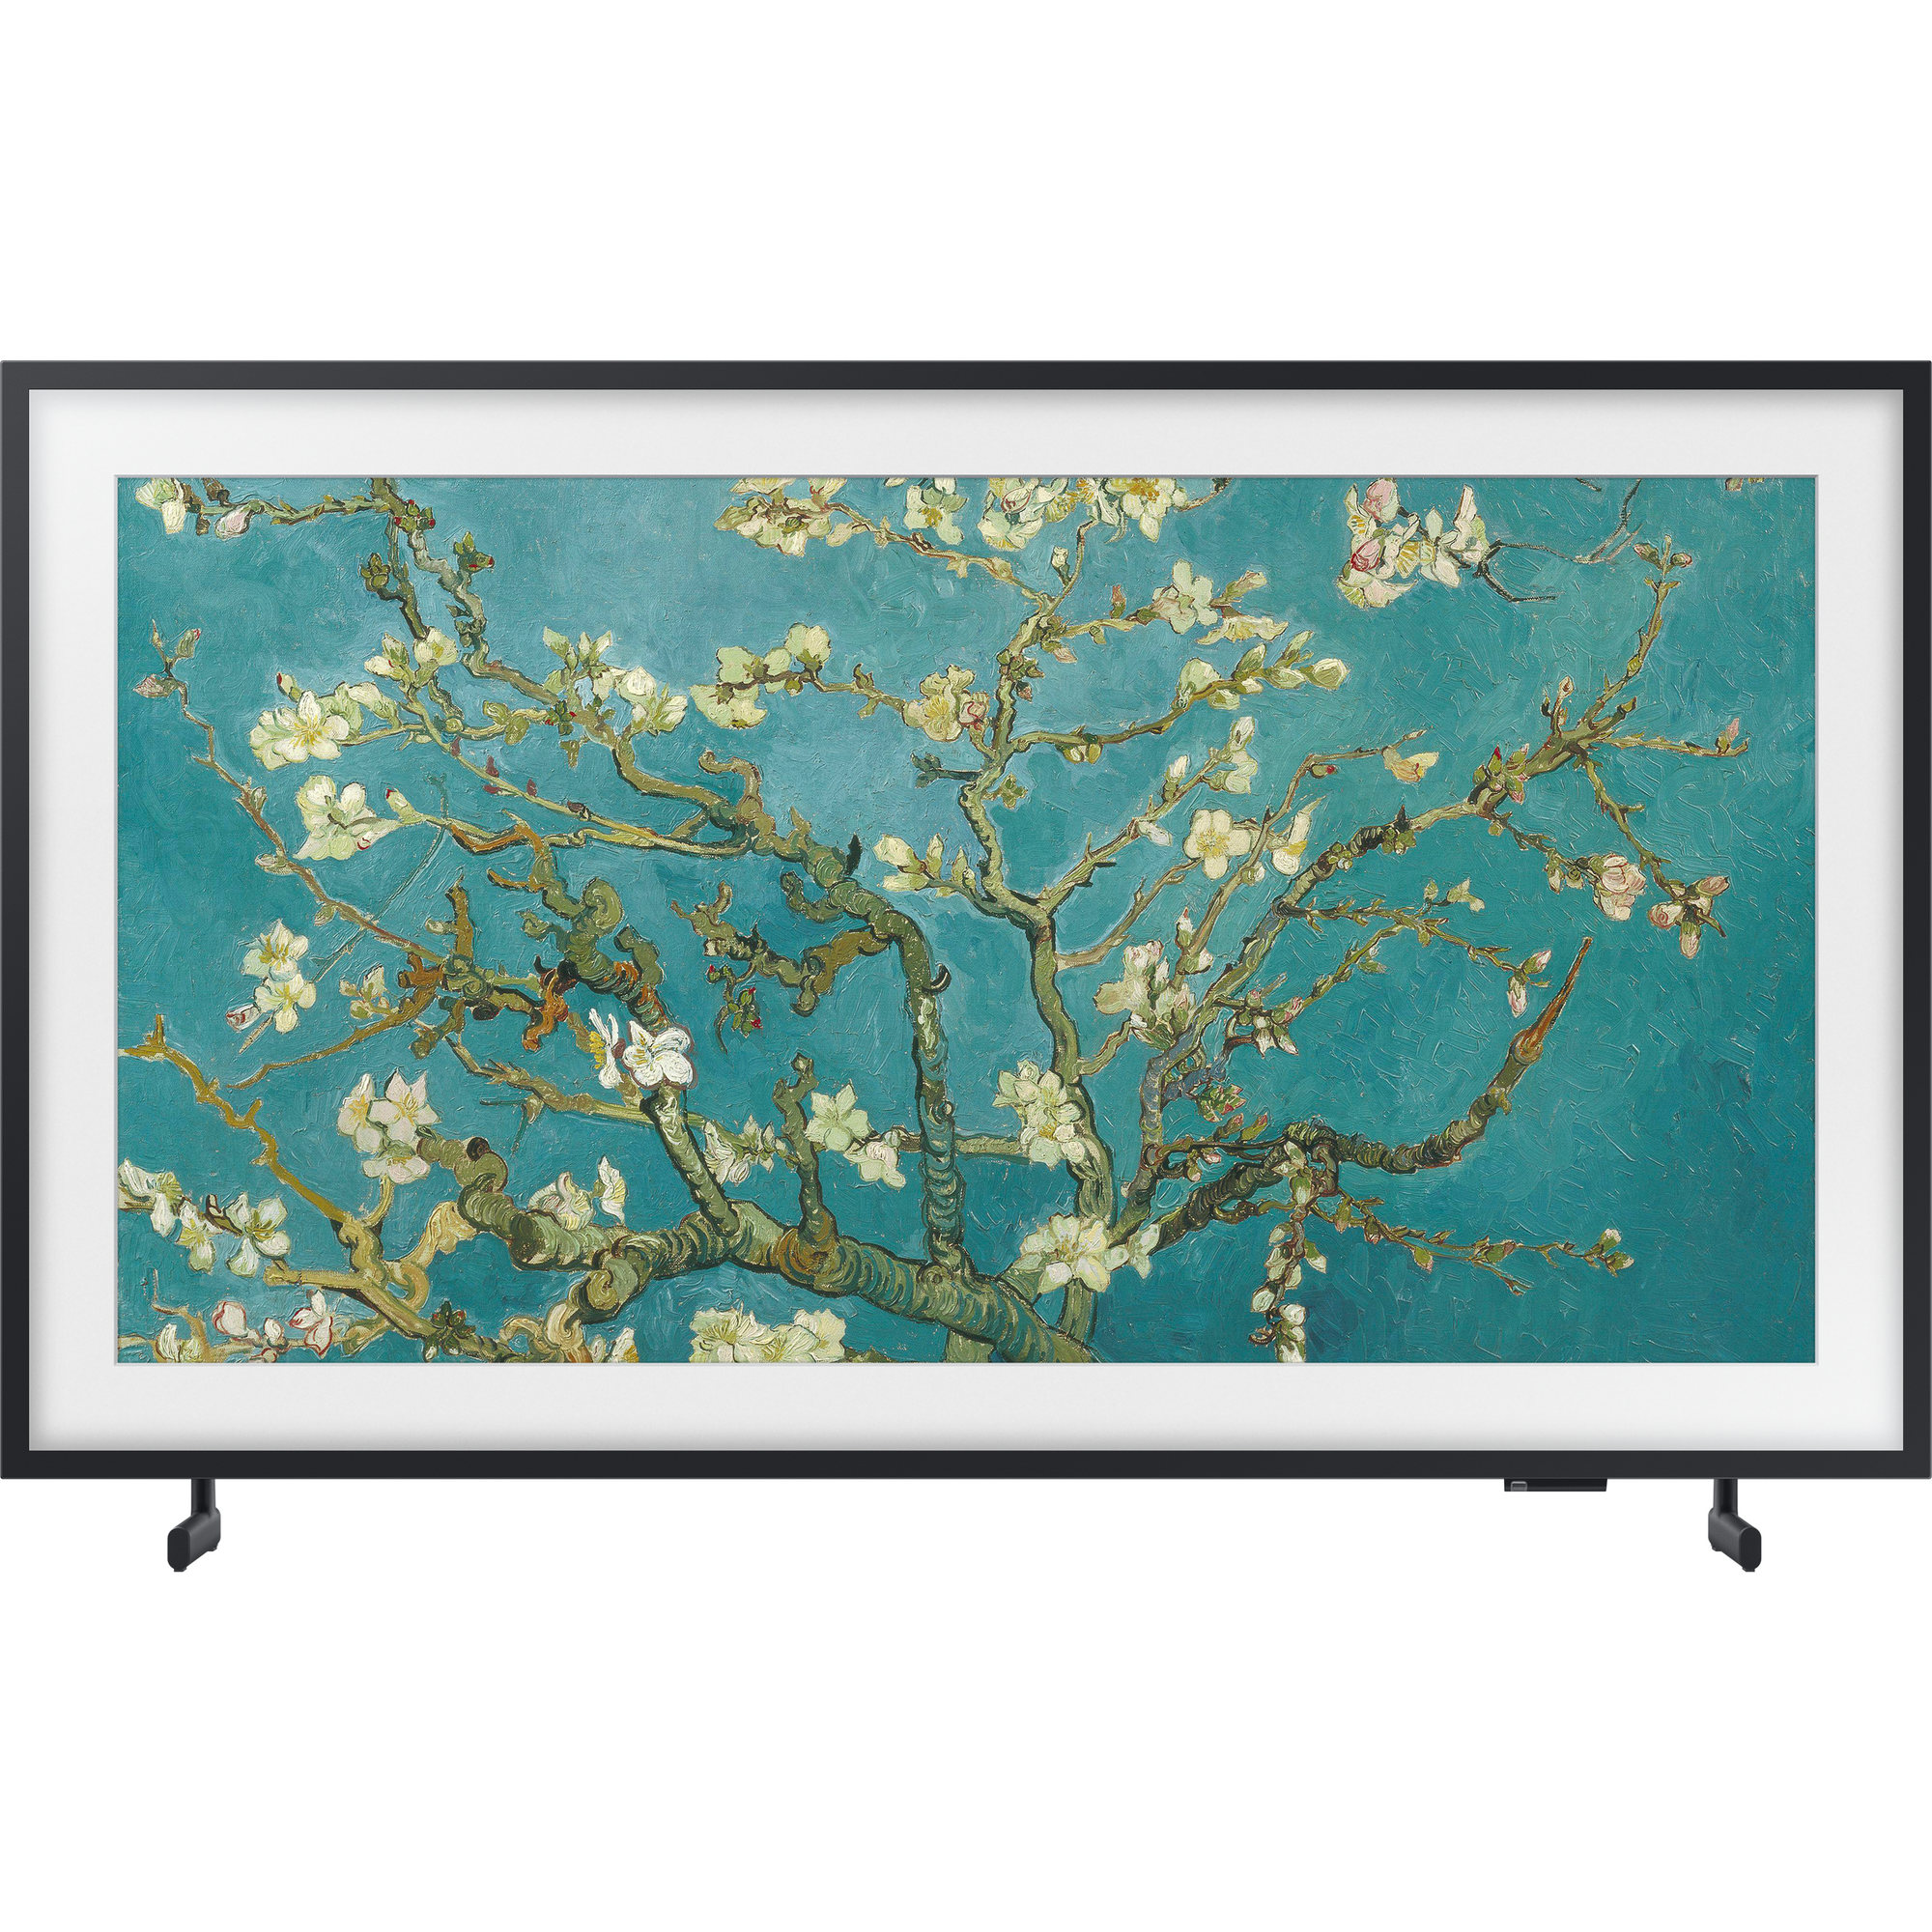 Samsung 32" The Frame Art Mode FHD HDR QLED Smart TV - Black | QE32LS03CBUXXU from Samsung - DID Electrical